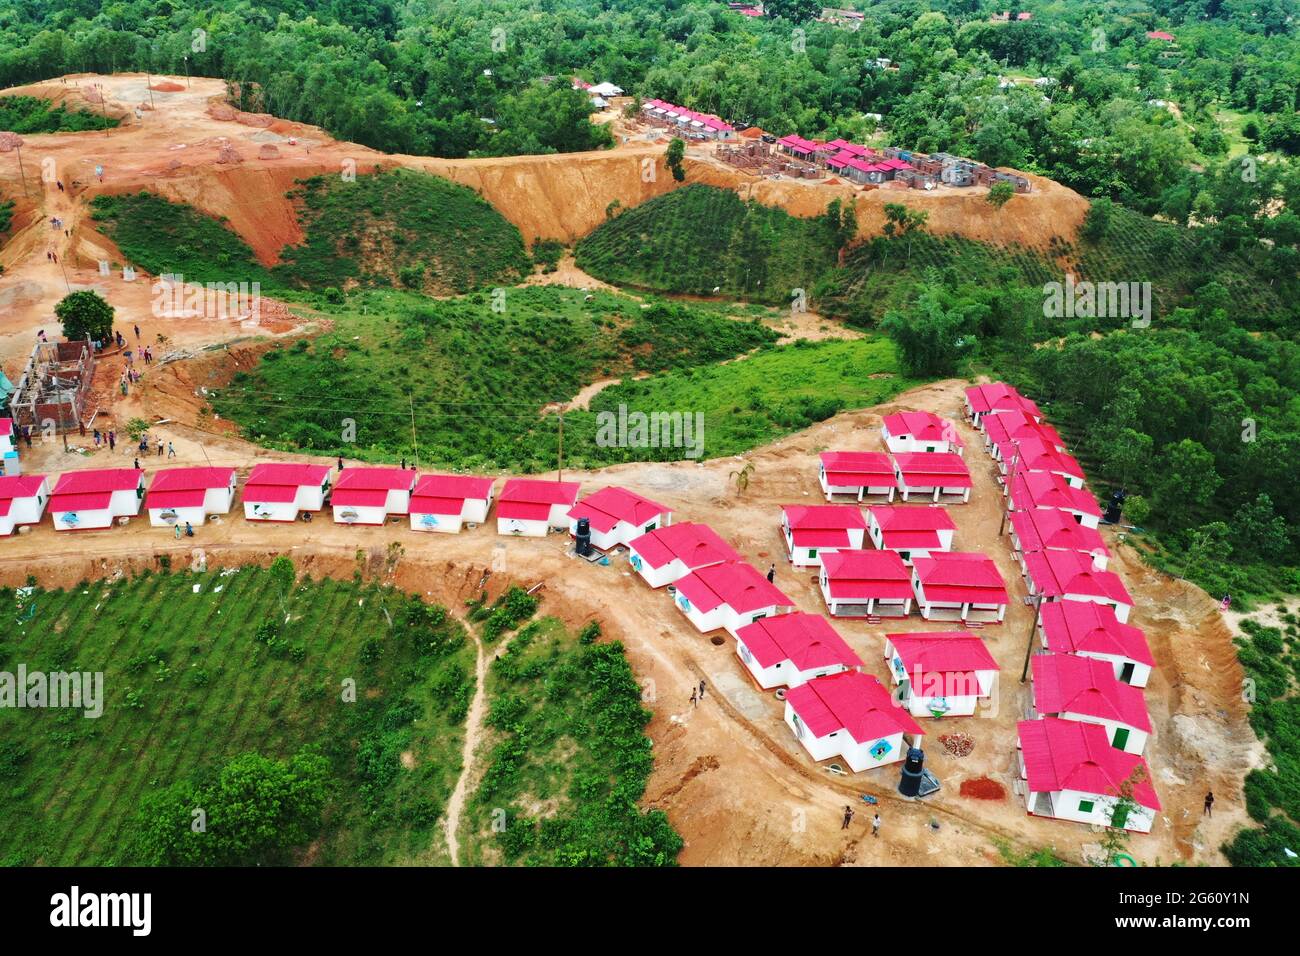 Moulvibazar, Bangladesh - June 20, 2021:  A bird’s eye view of the shelter project for homeless people at Sreemangal in Moulvibazar, Bangladesh. Stock Photo